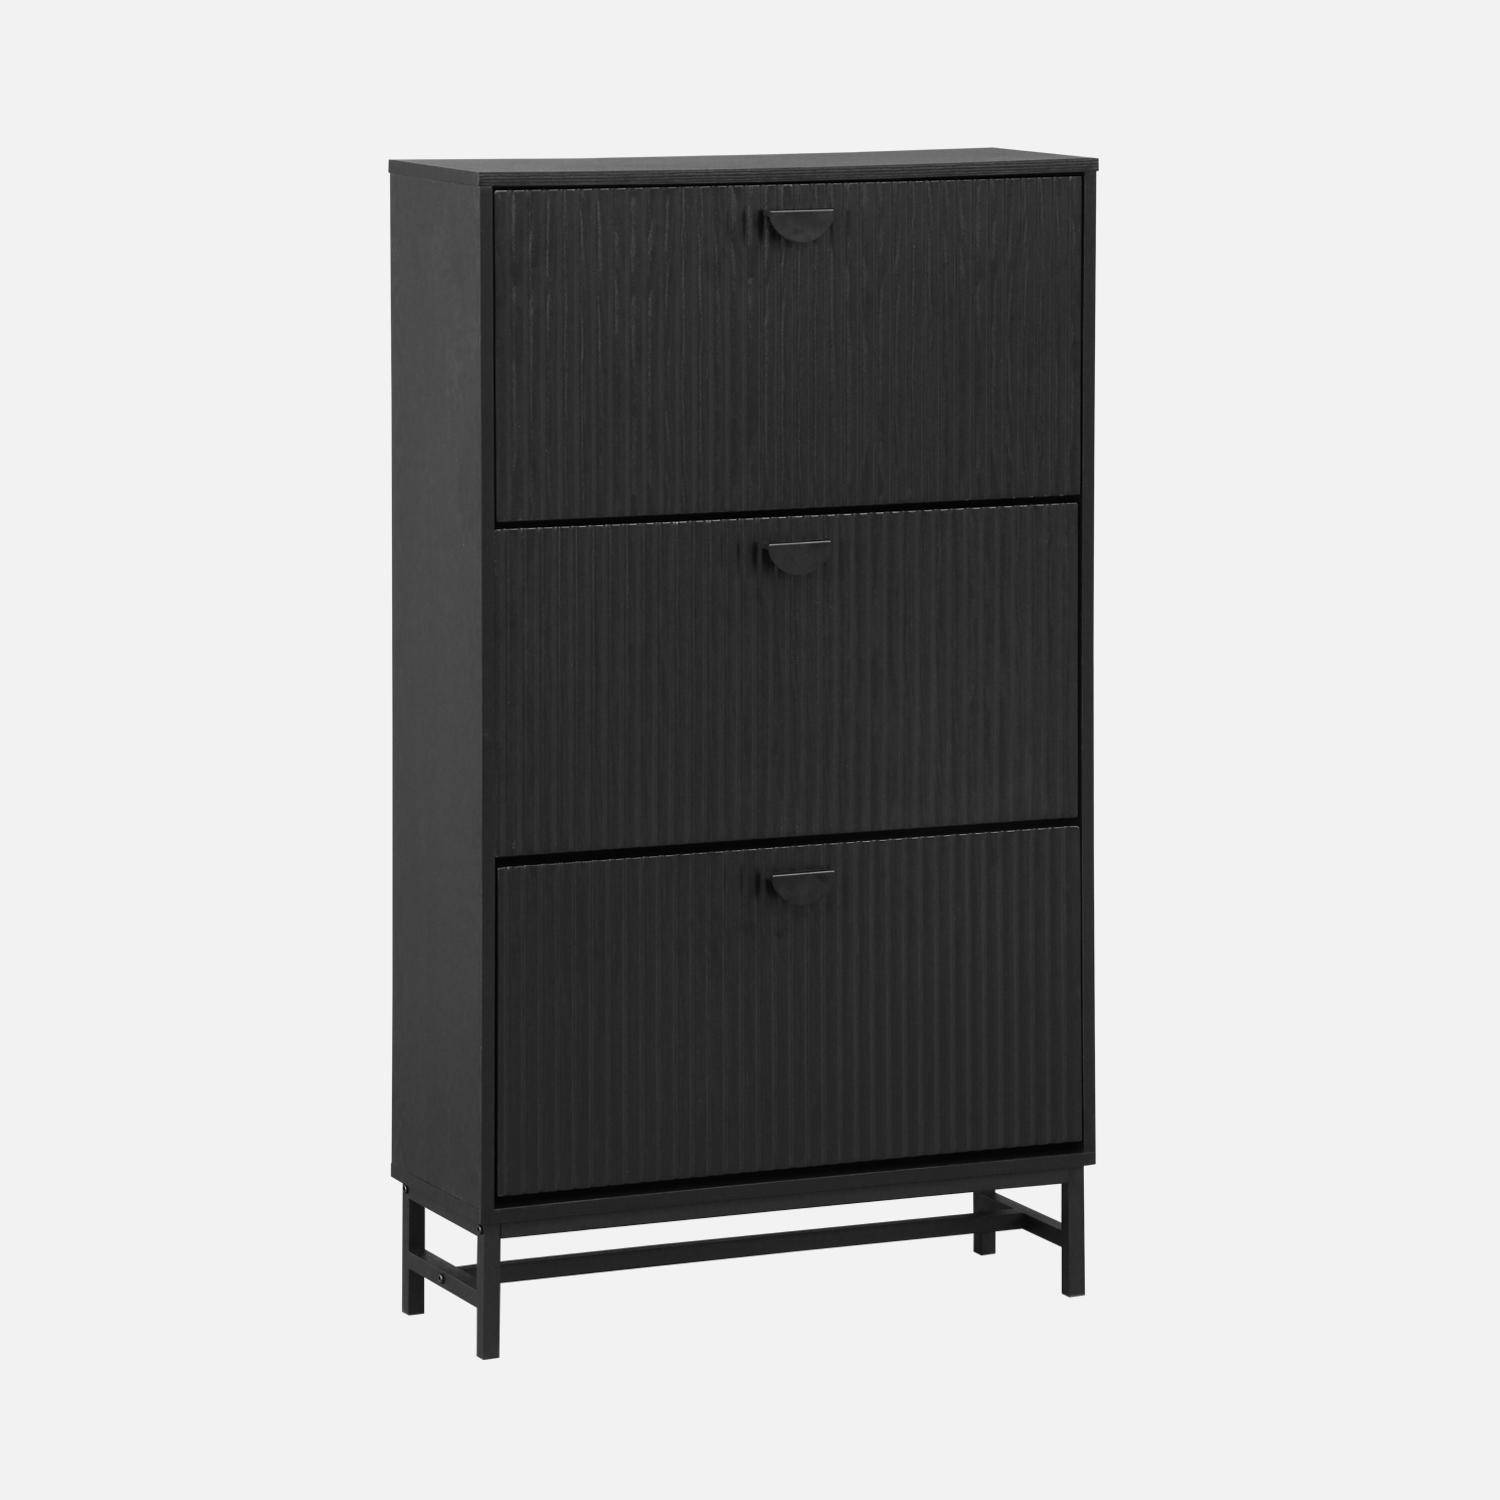 3-door shoe cabinet, black grooved wood decor, contemporary style, 18 pairs of shoes,sweeek,Photo5